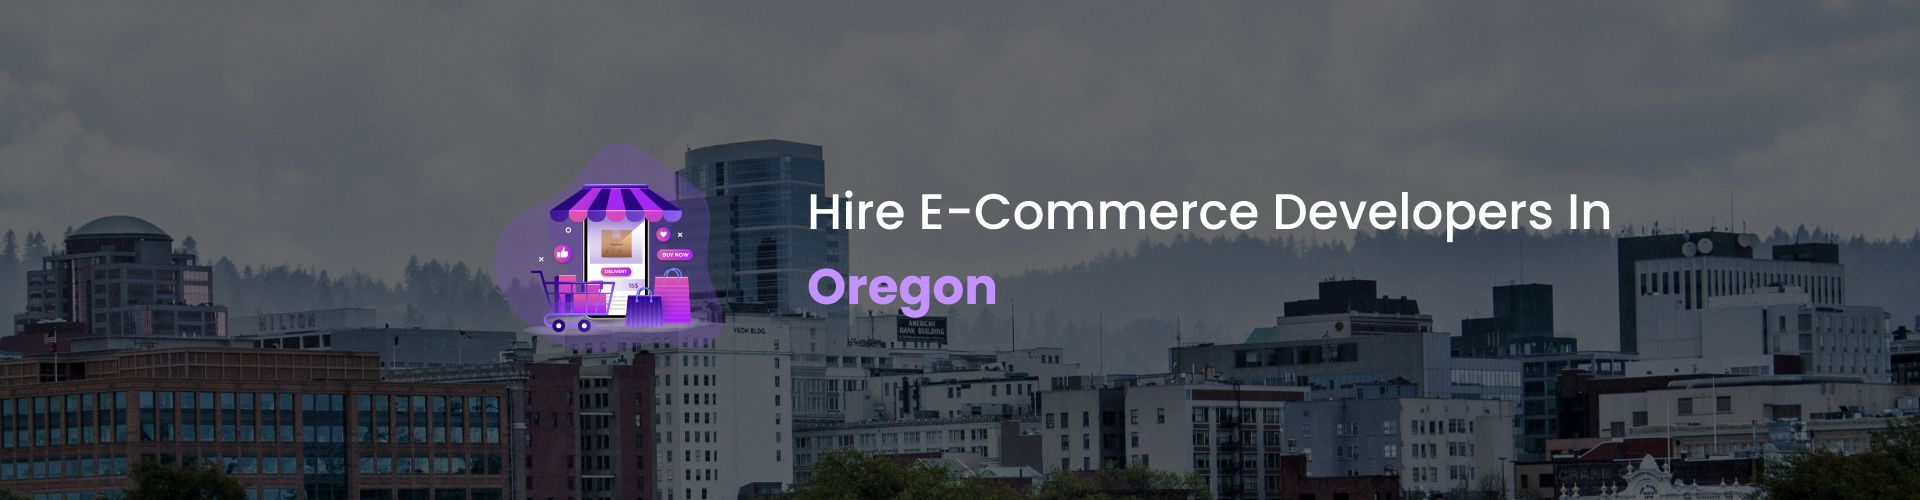 hire ecommerce developers in oregon